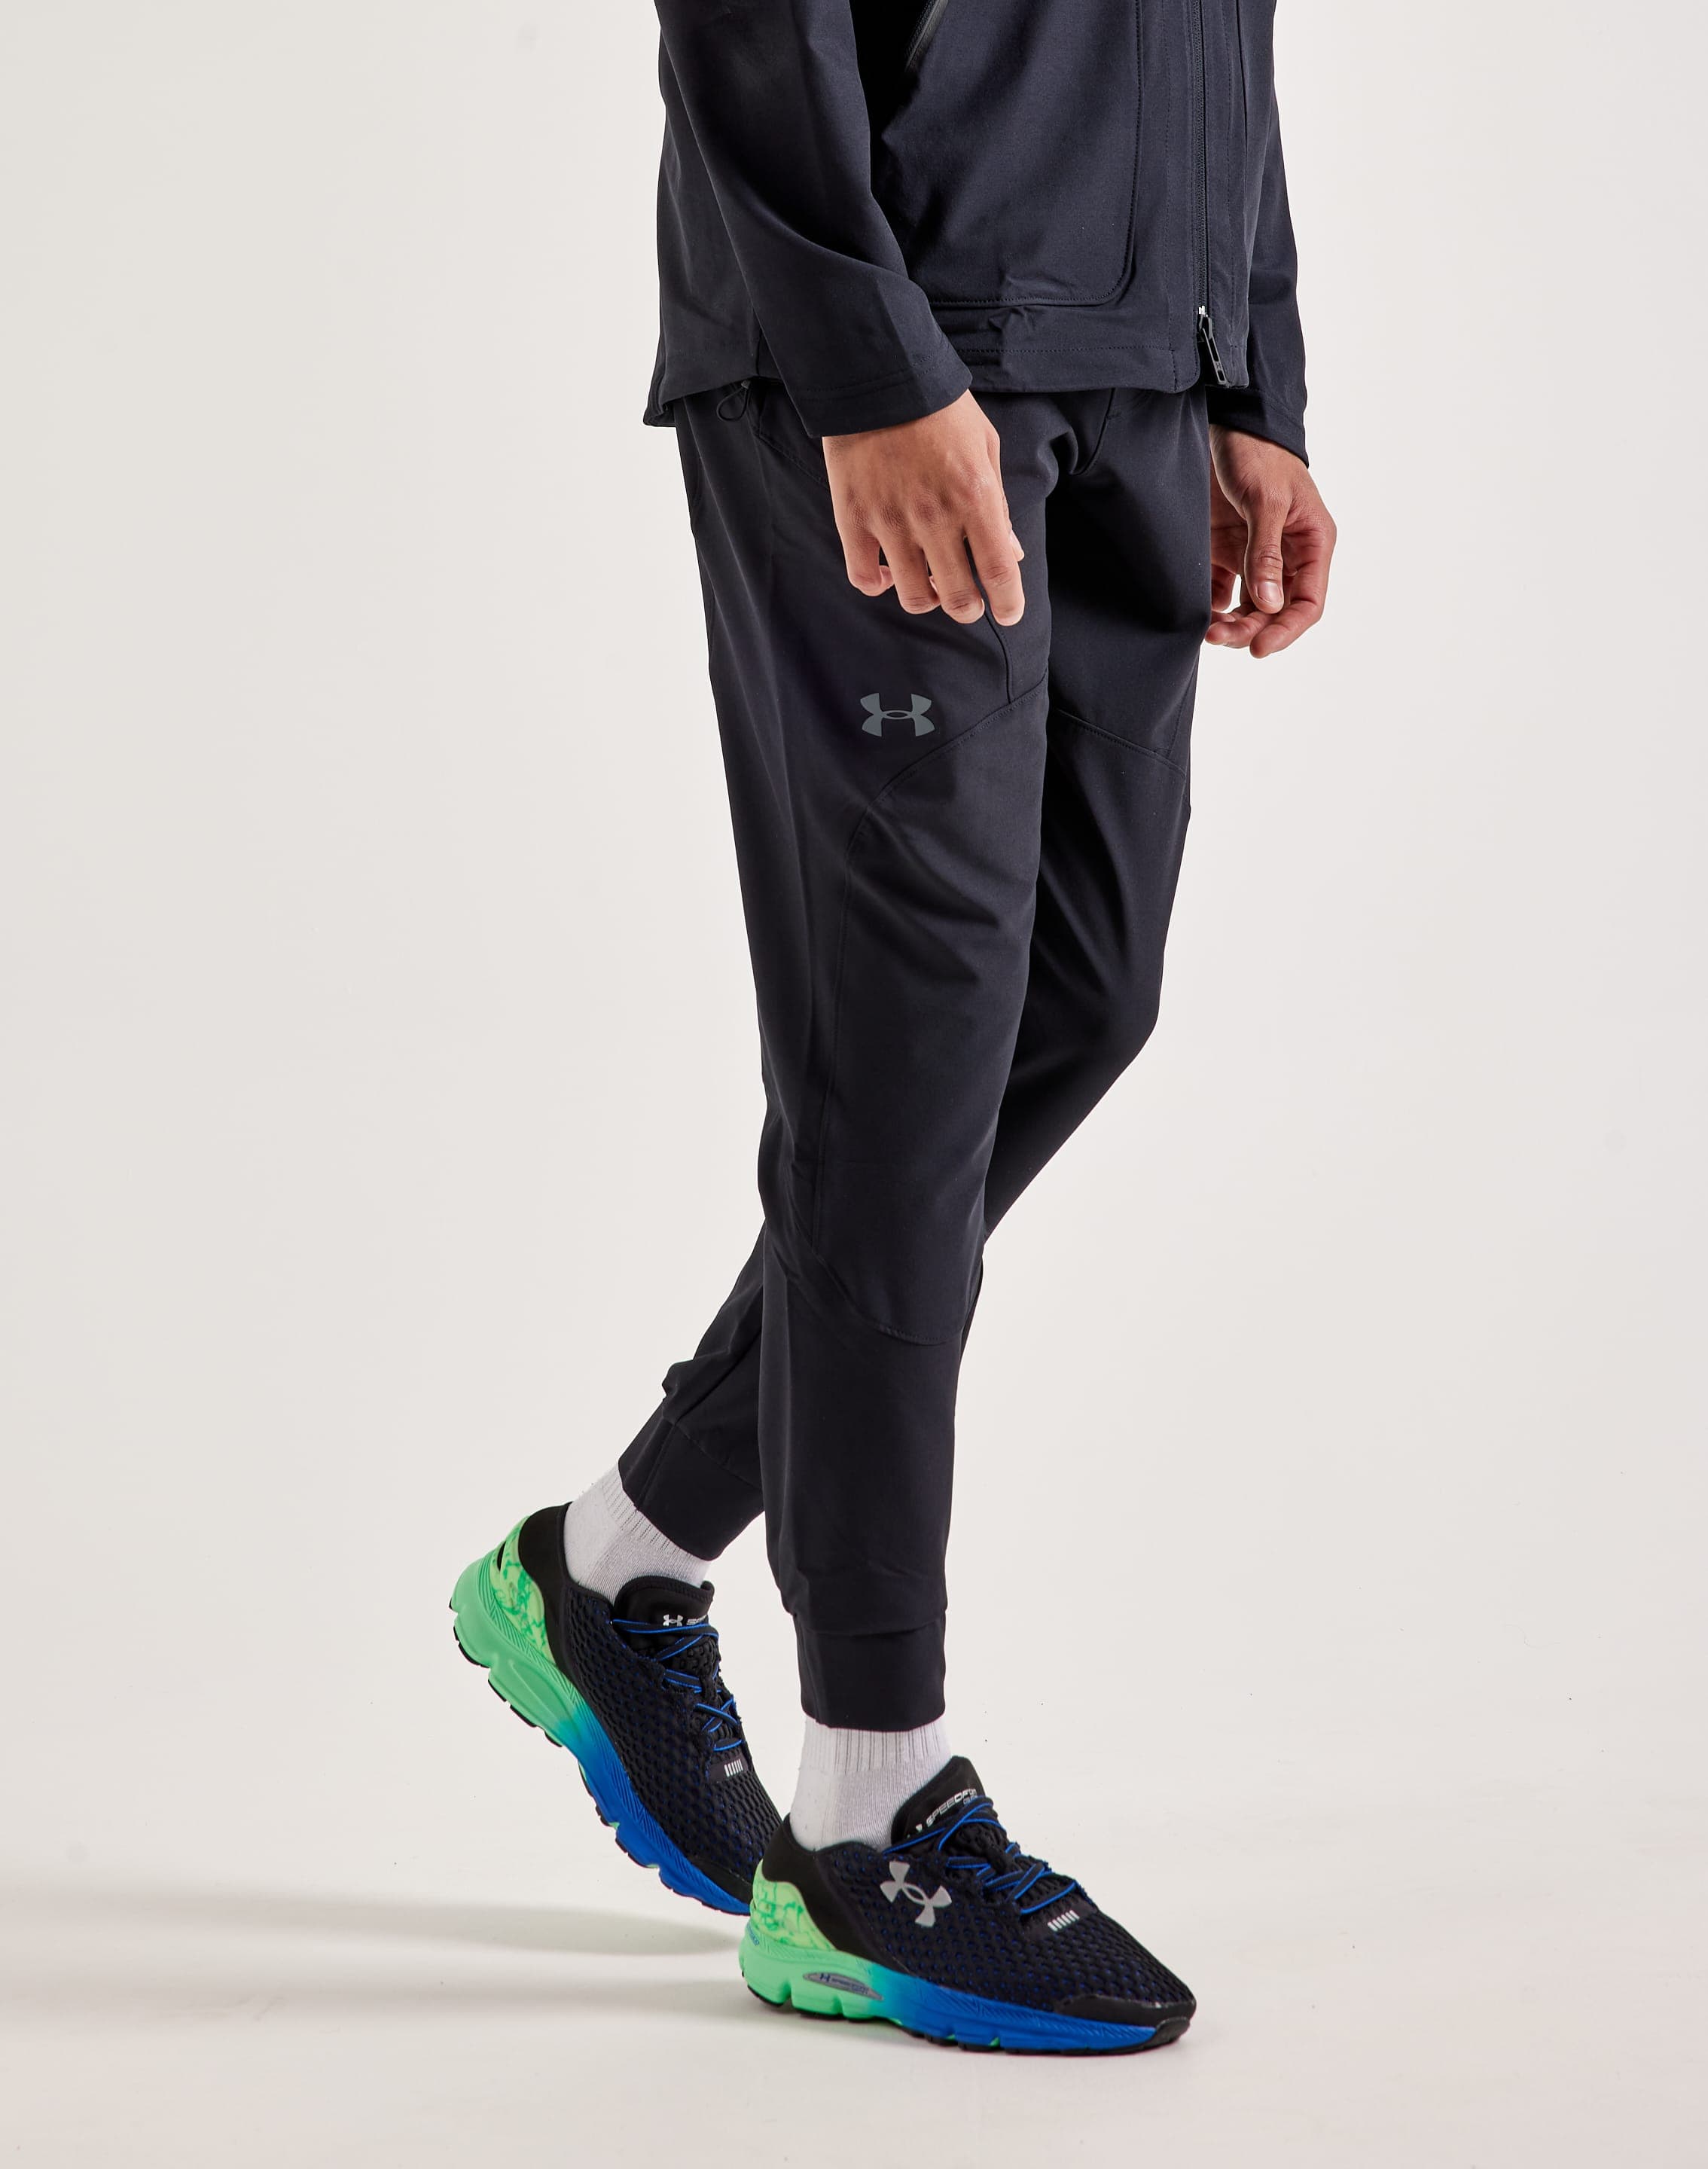 Under Armour Unstoppable Joggers – DTLR